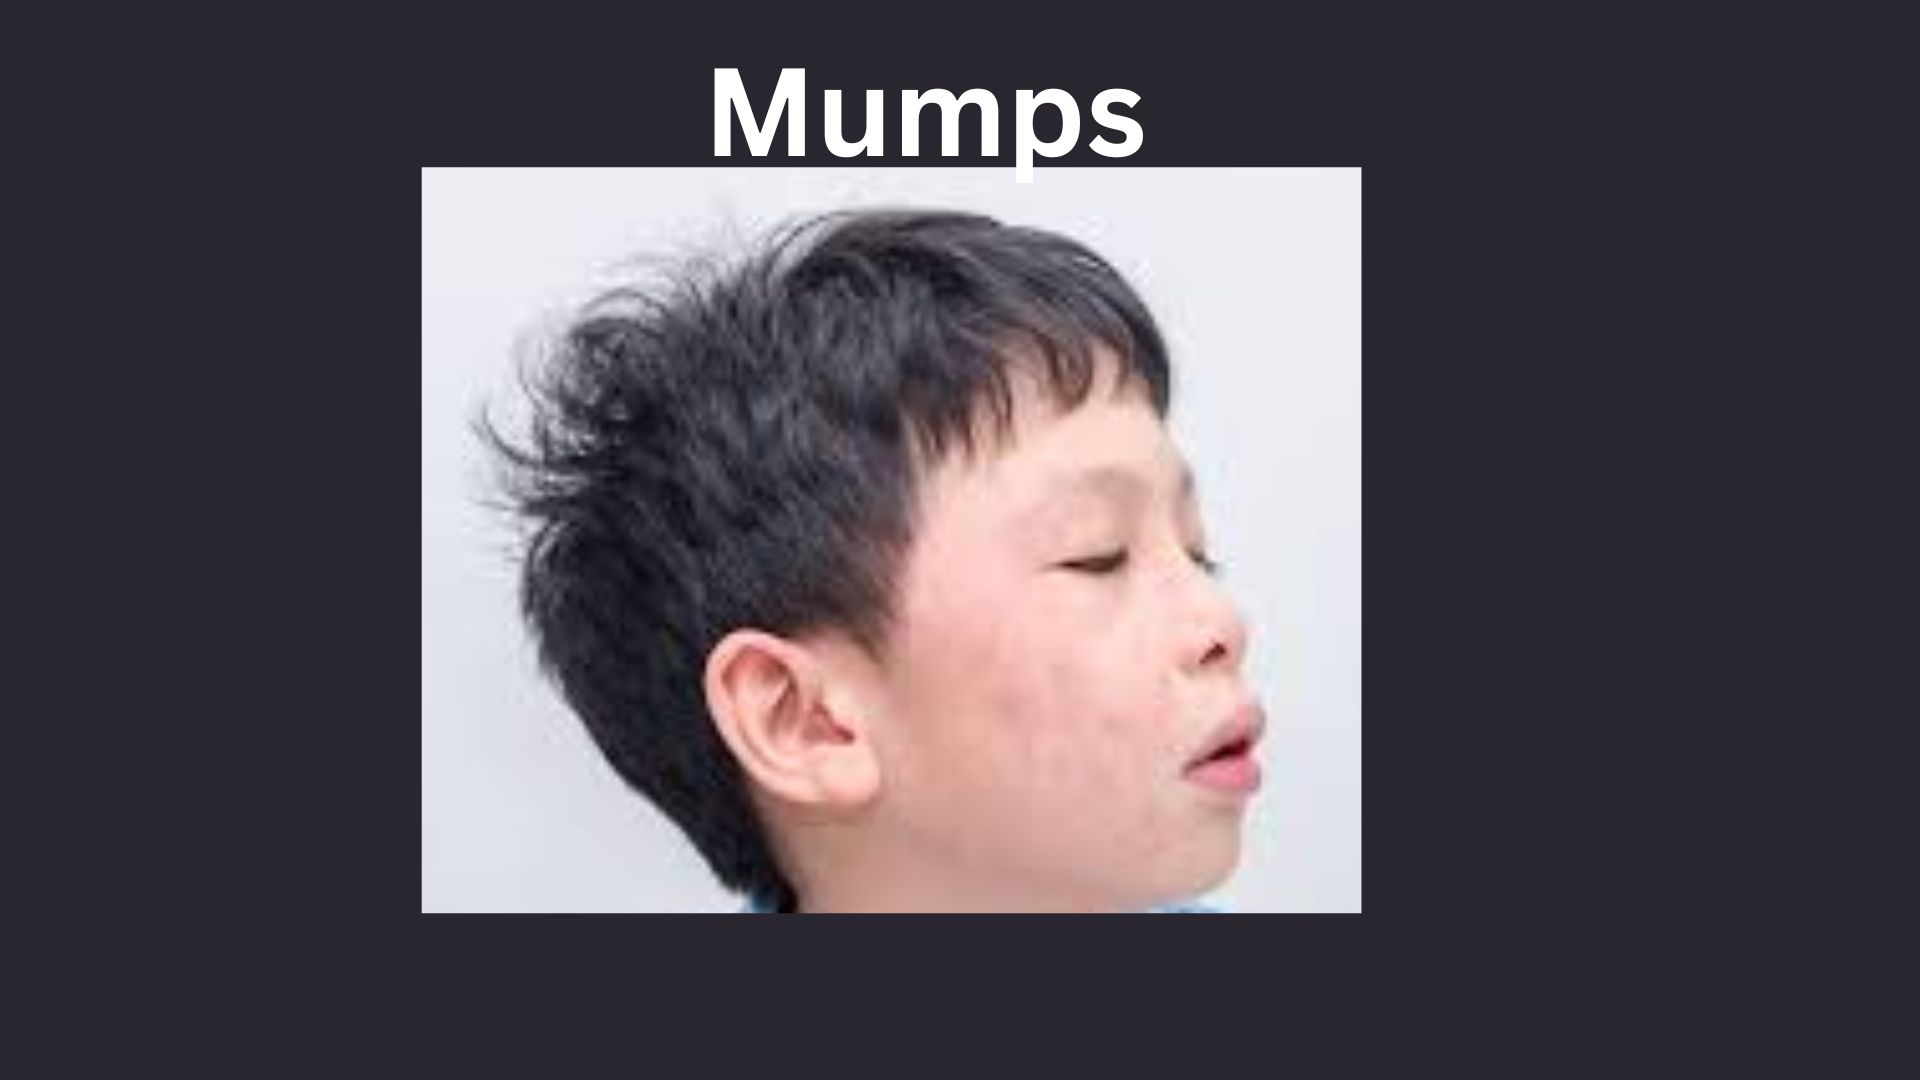 Mumps outbreak in Kerala: A comprehensive guide on disease’s symptoms and prevention techniques